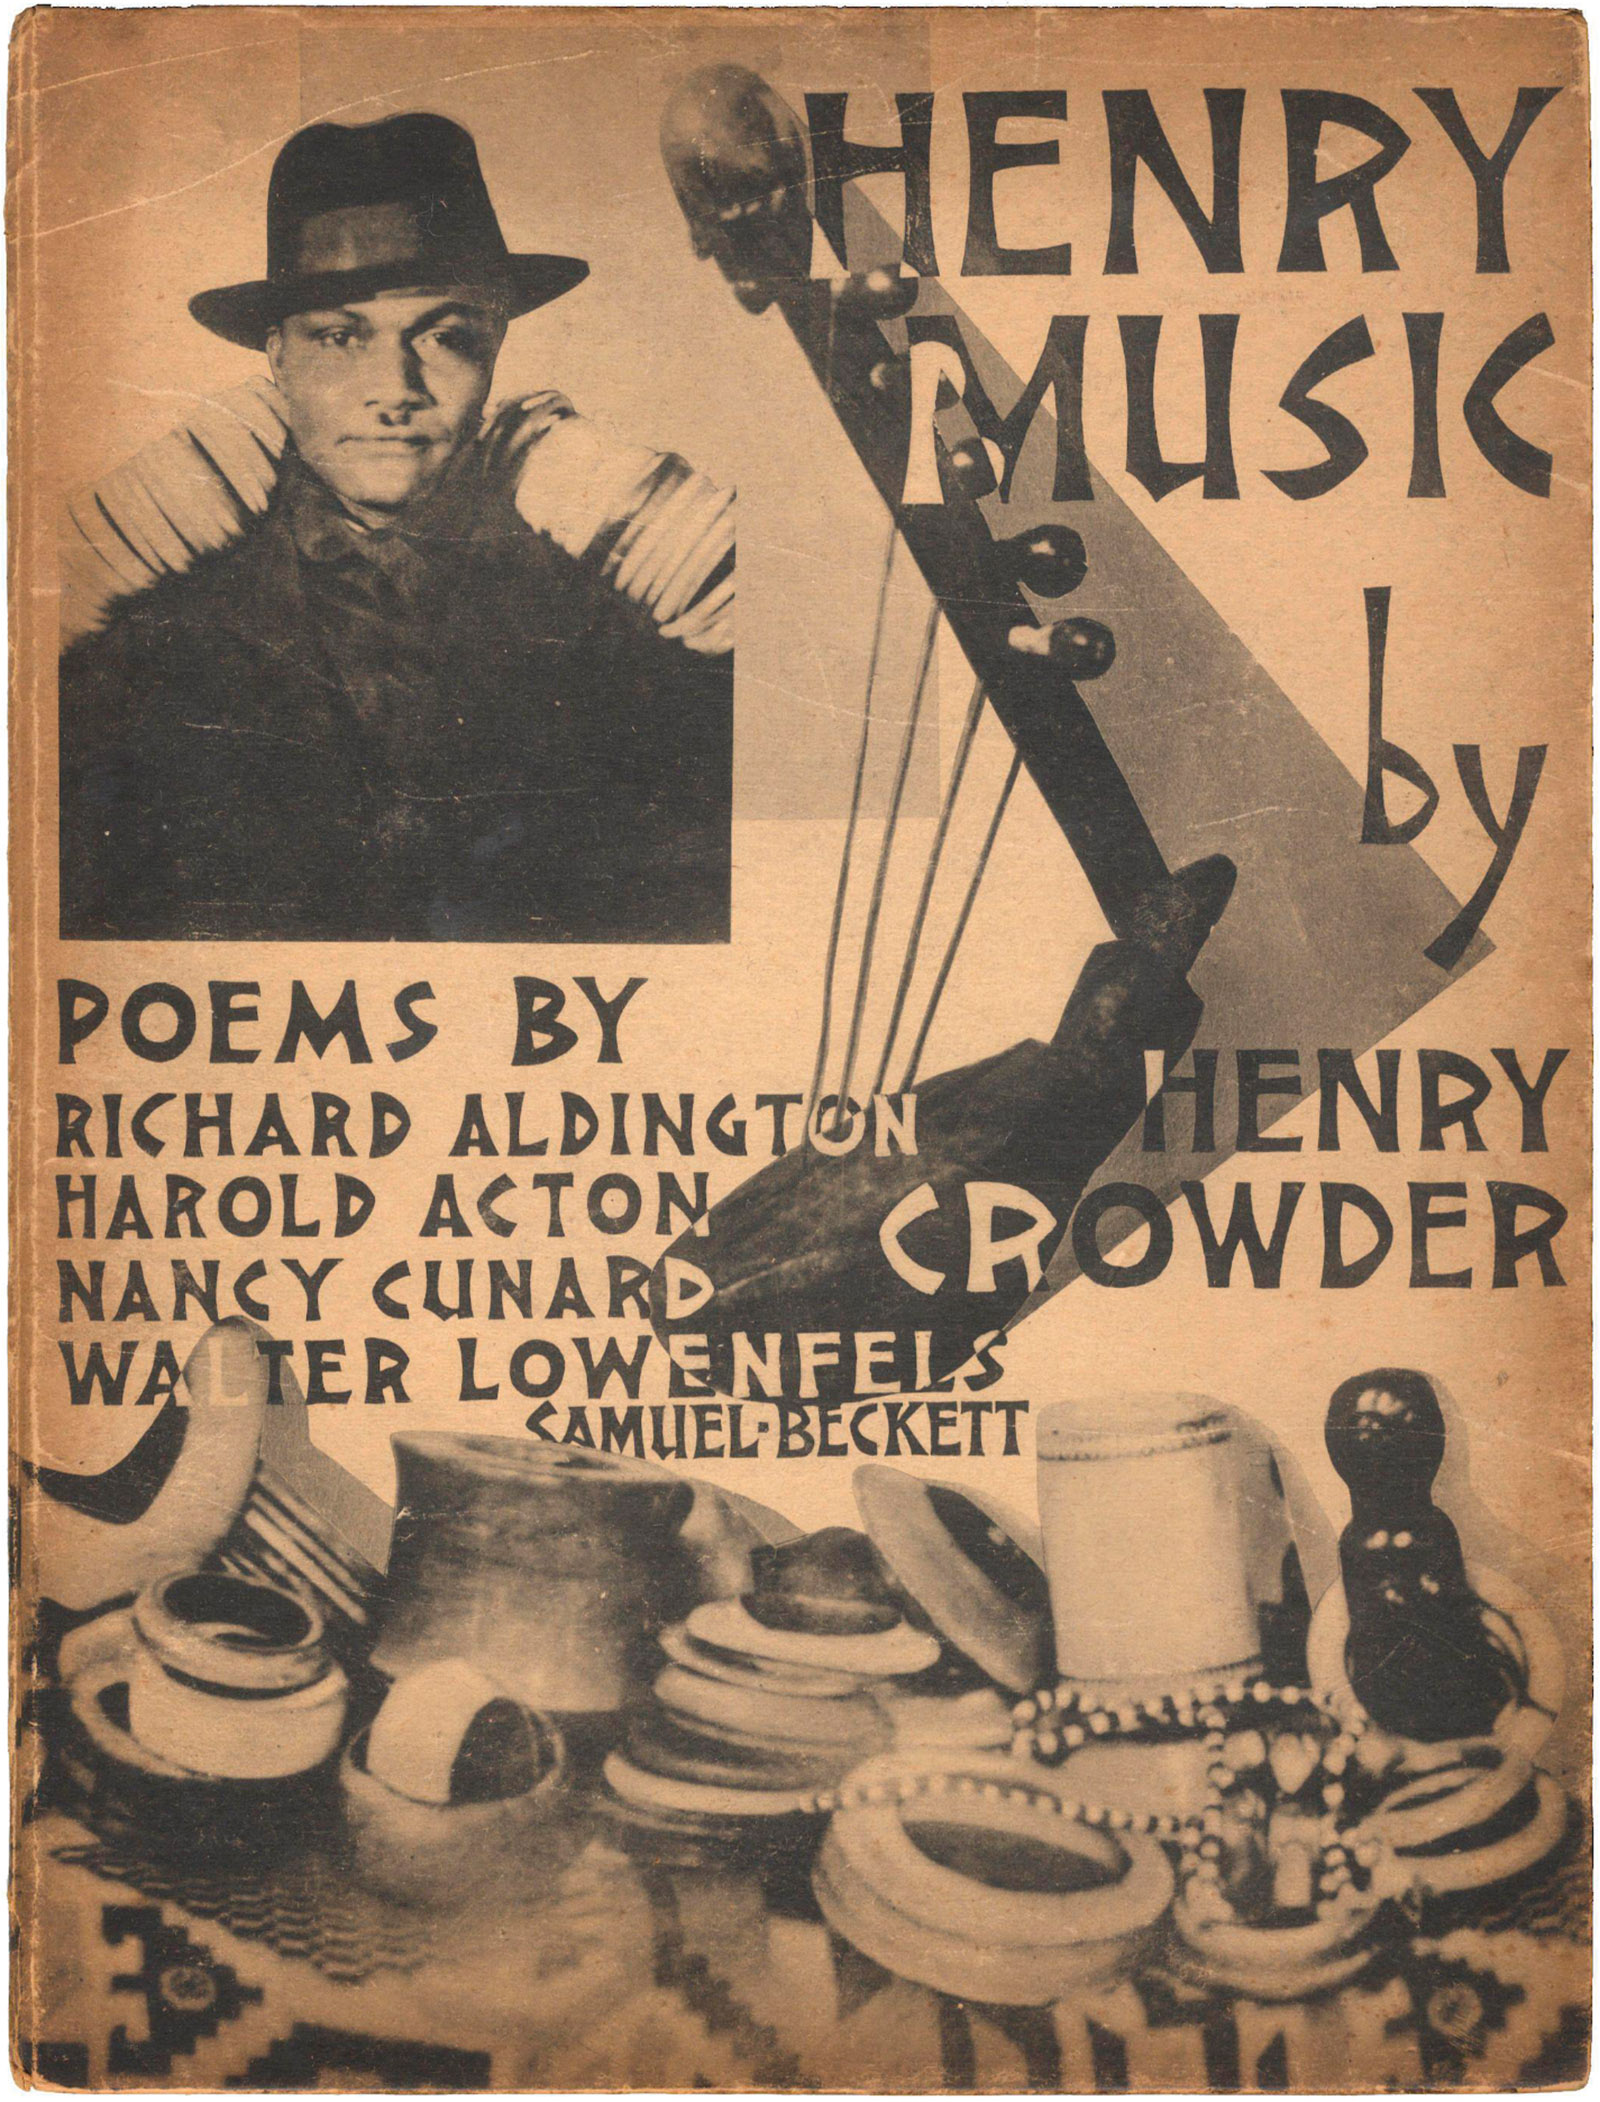 The cover of Henry Crowder’s Henry-­Music, featuring a photomontage by Man Ray